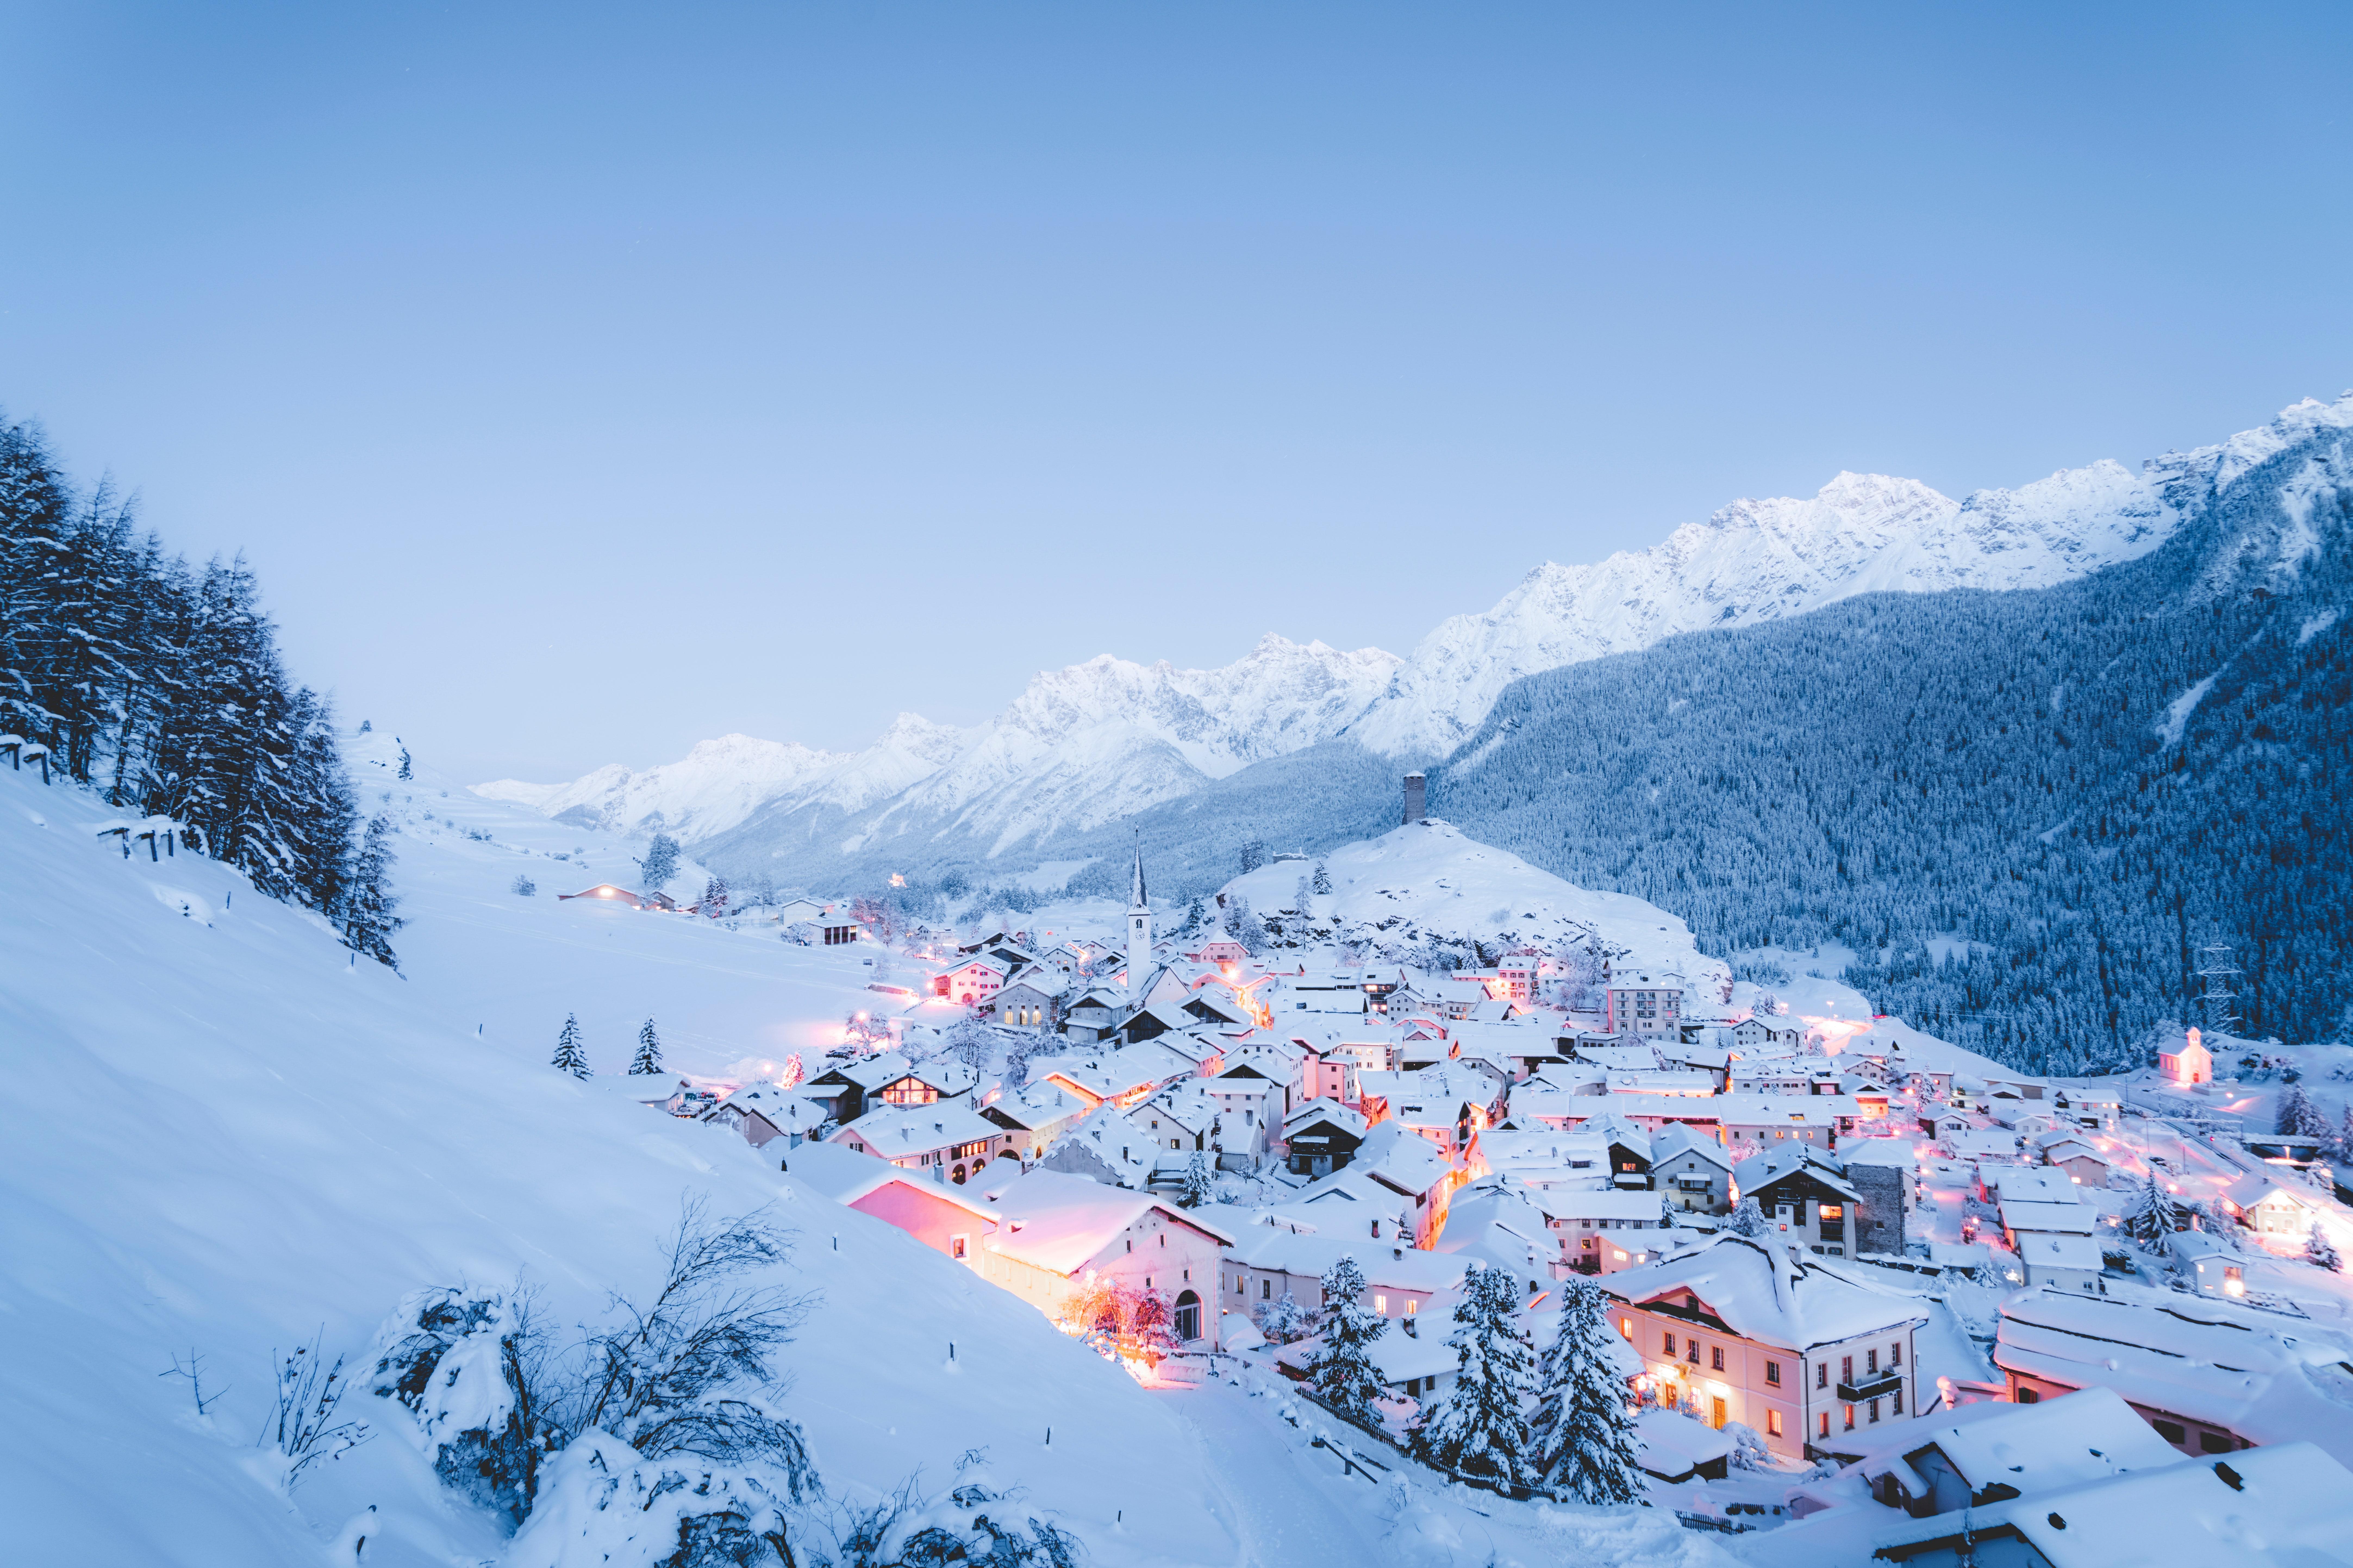 Switzerland Winter Guide The Most Magical Things to Do This